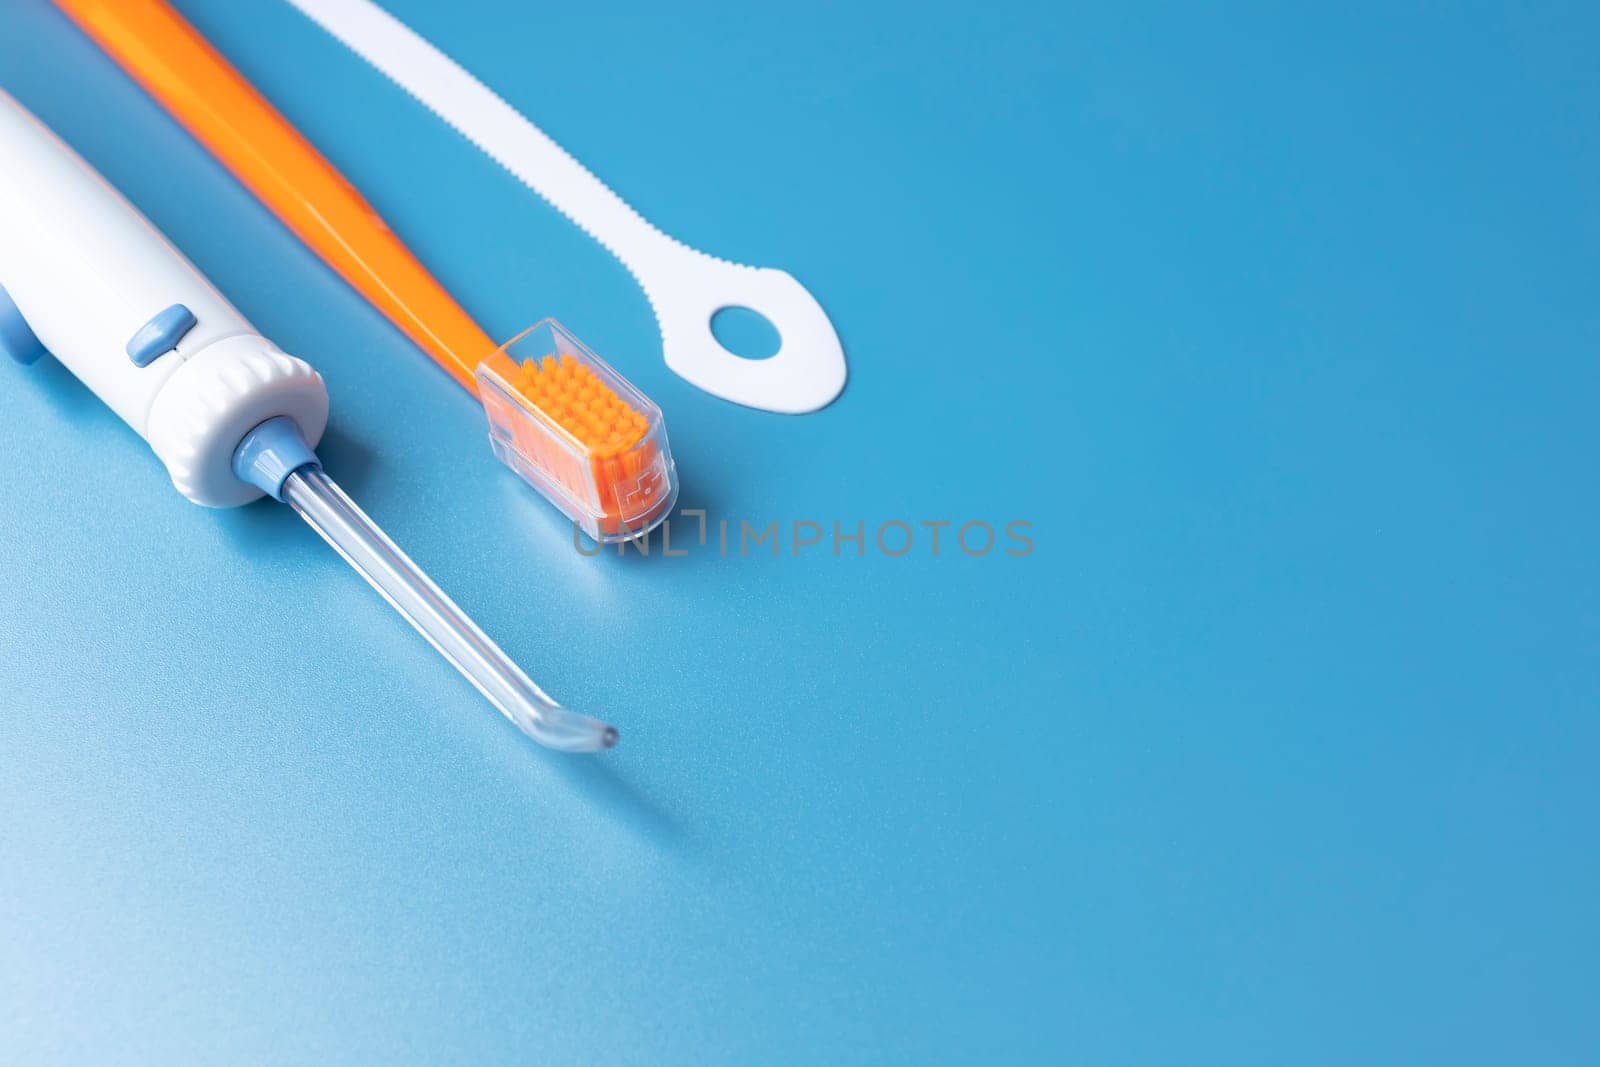 Design Dental Cleaning Set, Oral Hygiene. Toothbrush, Oral Irrigator, Floss, Tongue Scraper On Blue Background. Flat Lay Of Dental Care Tools, Tooth Hygienic Equipment. Horizontal Plane. Copy Space. by netatsi